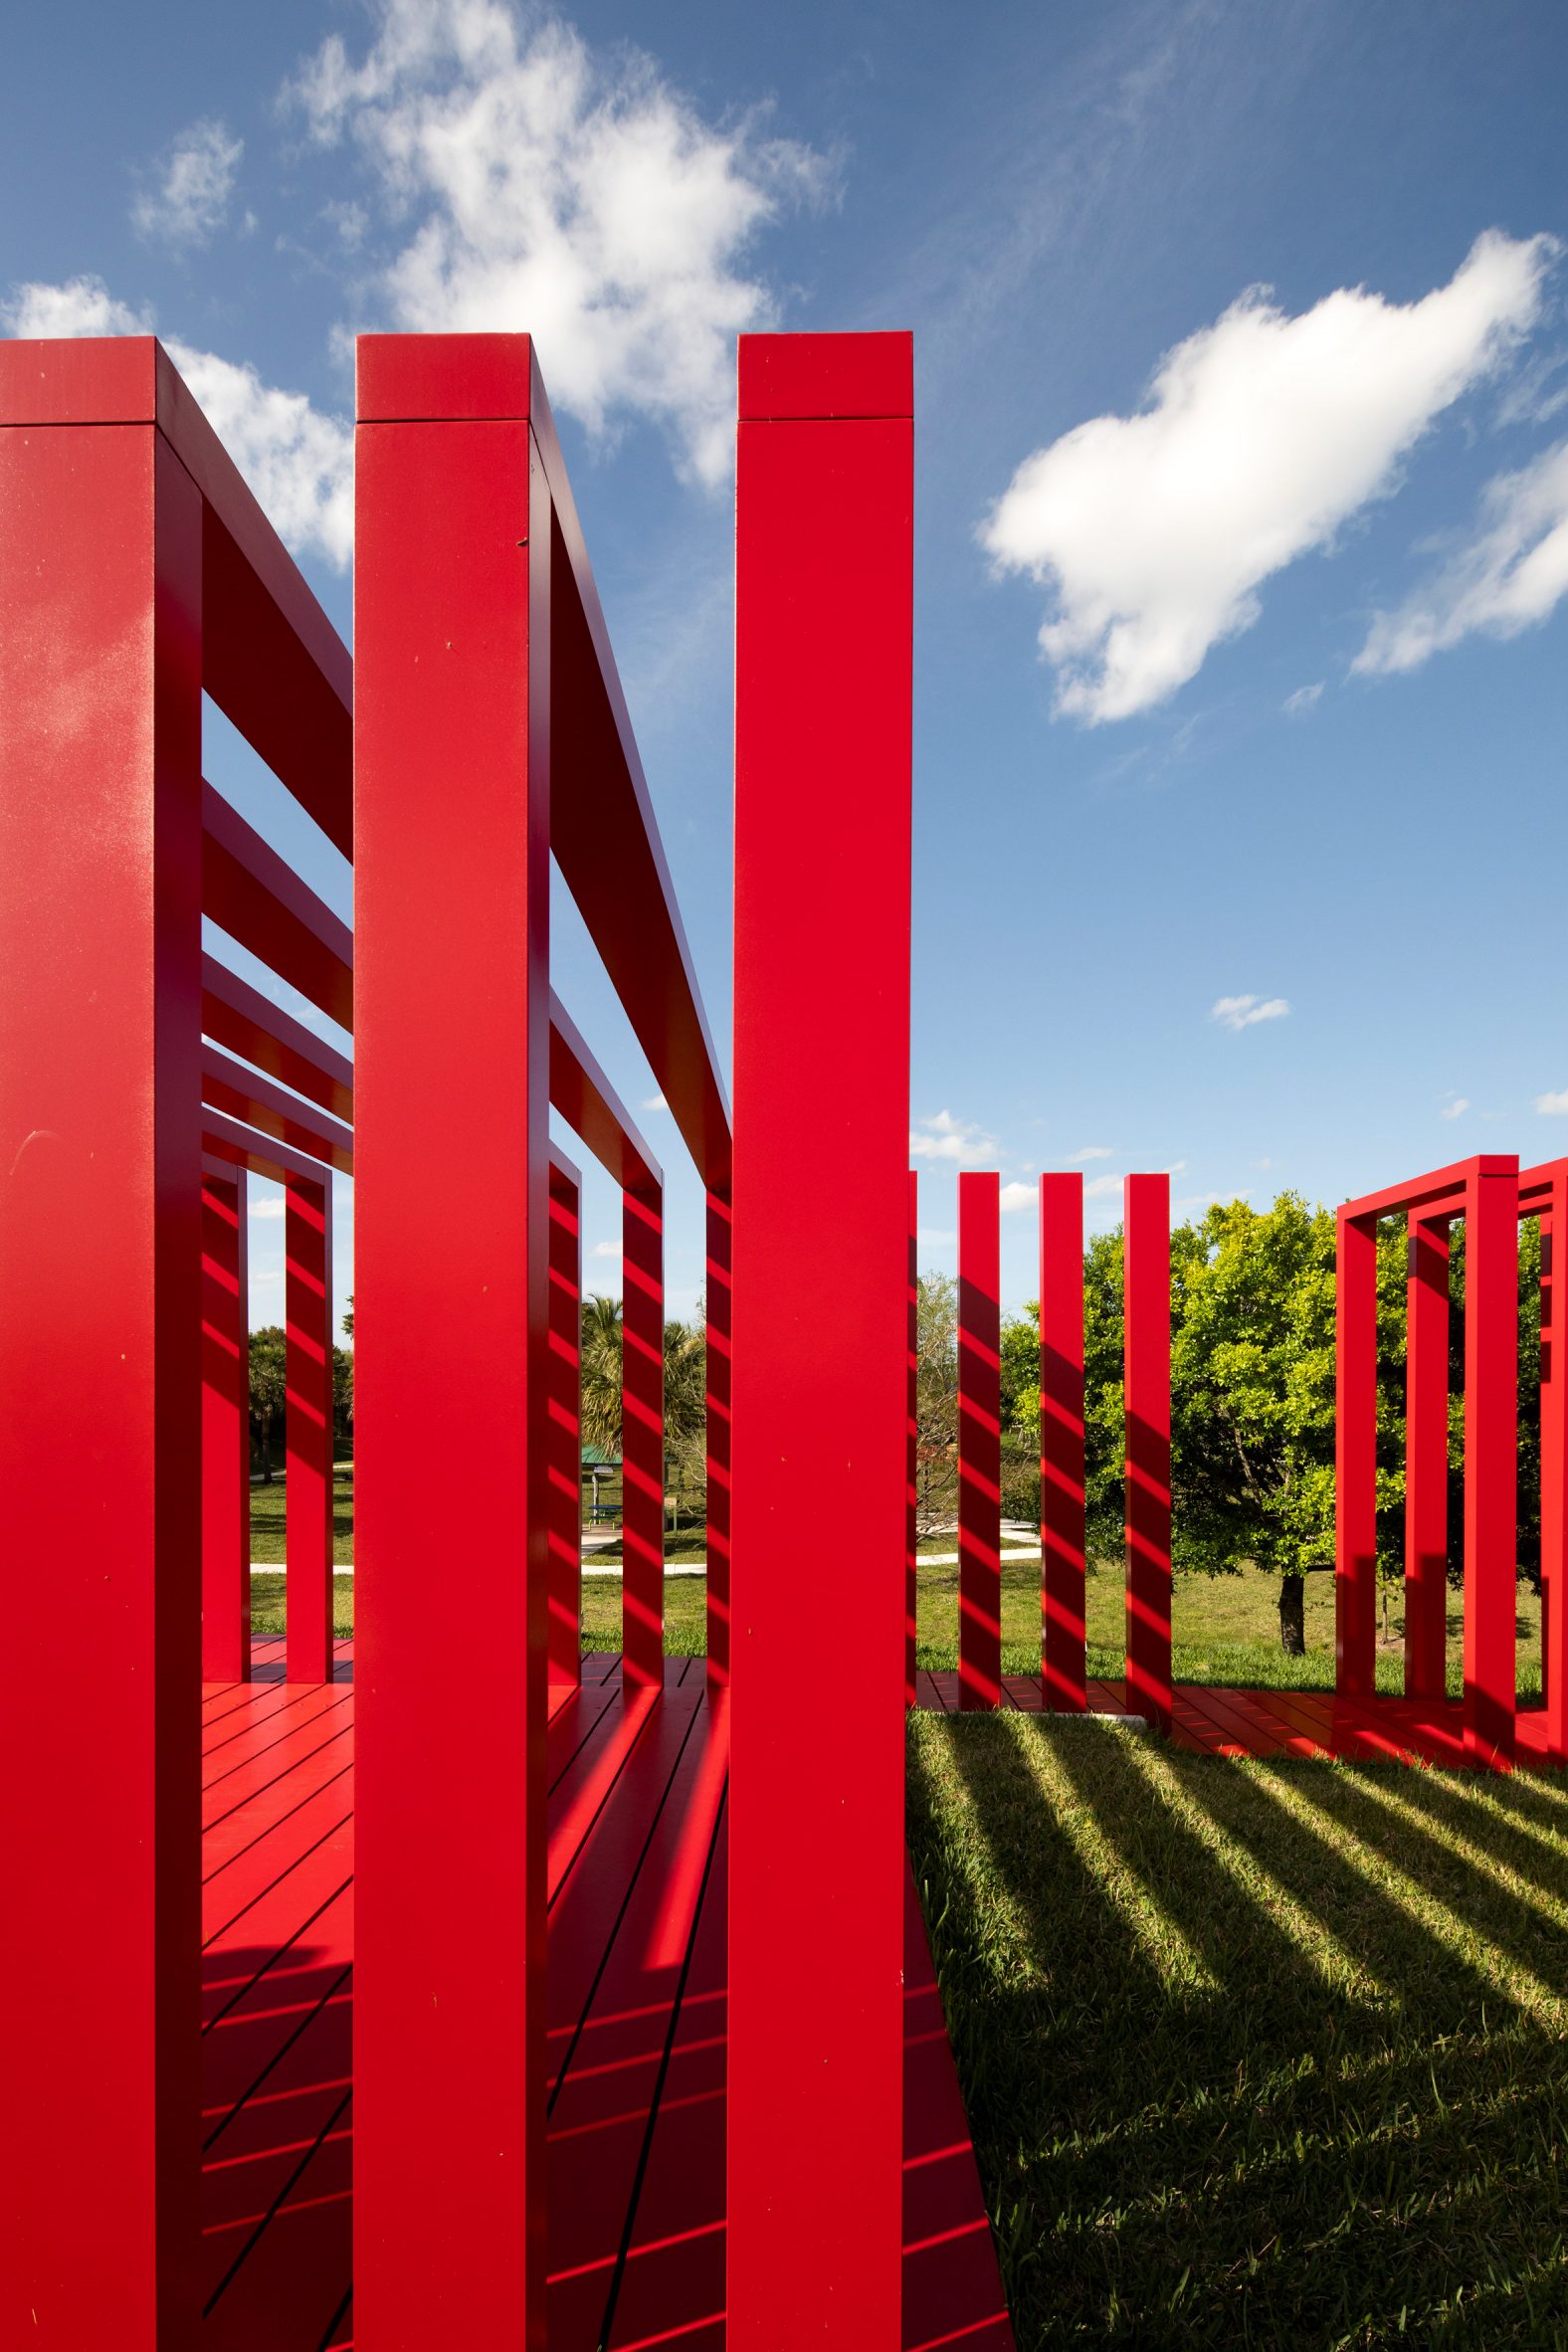 Red aluminium slats with shadows and clouds